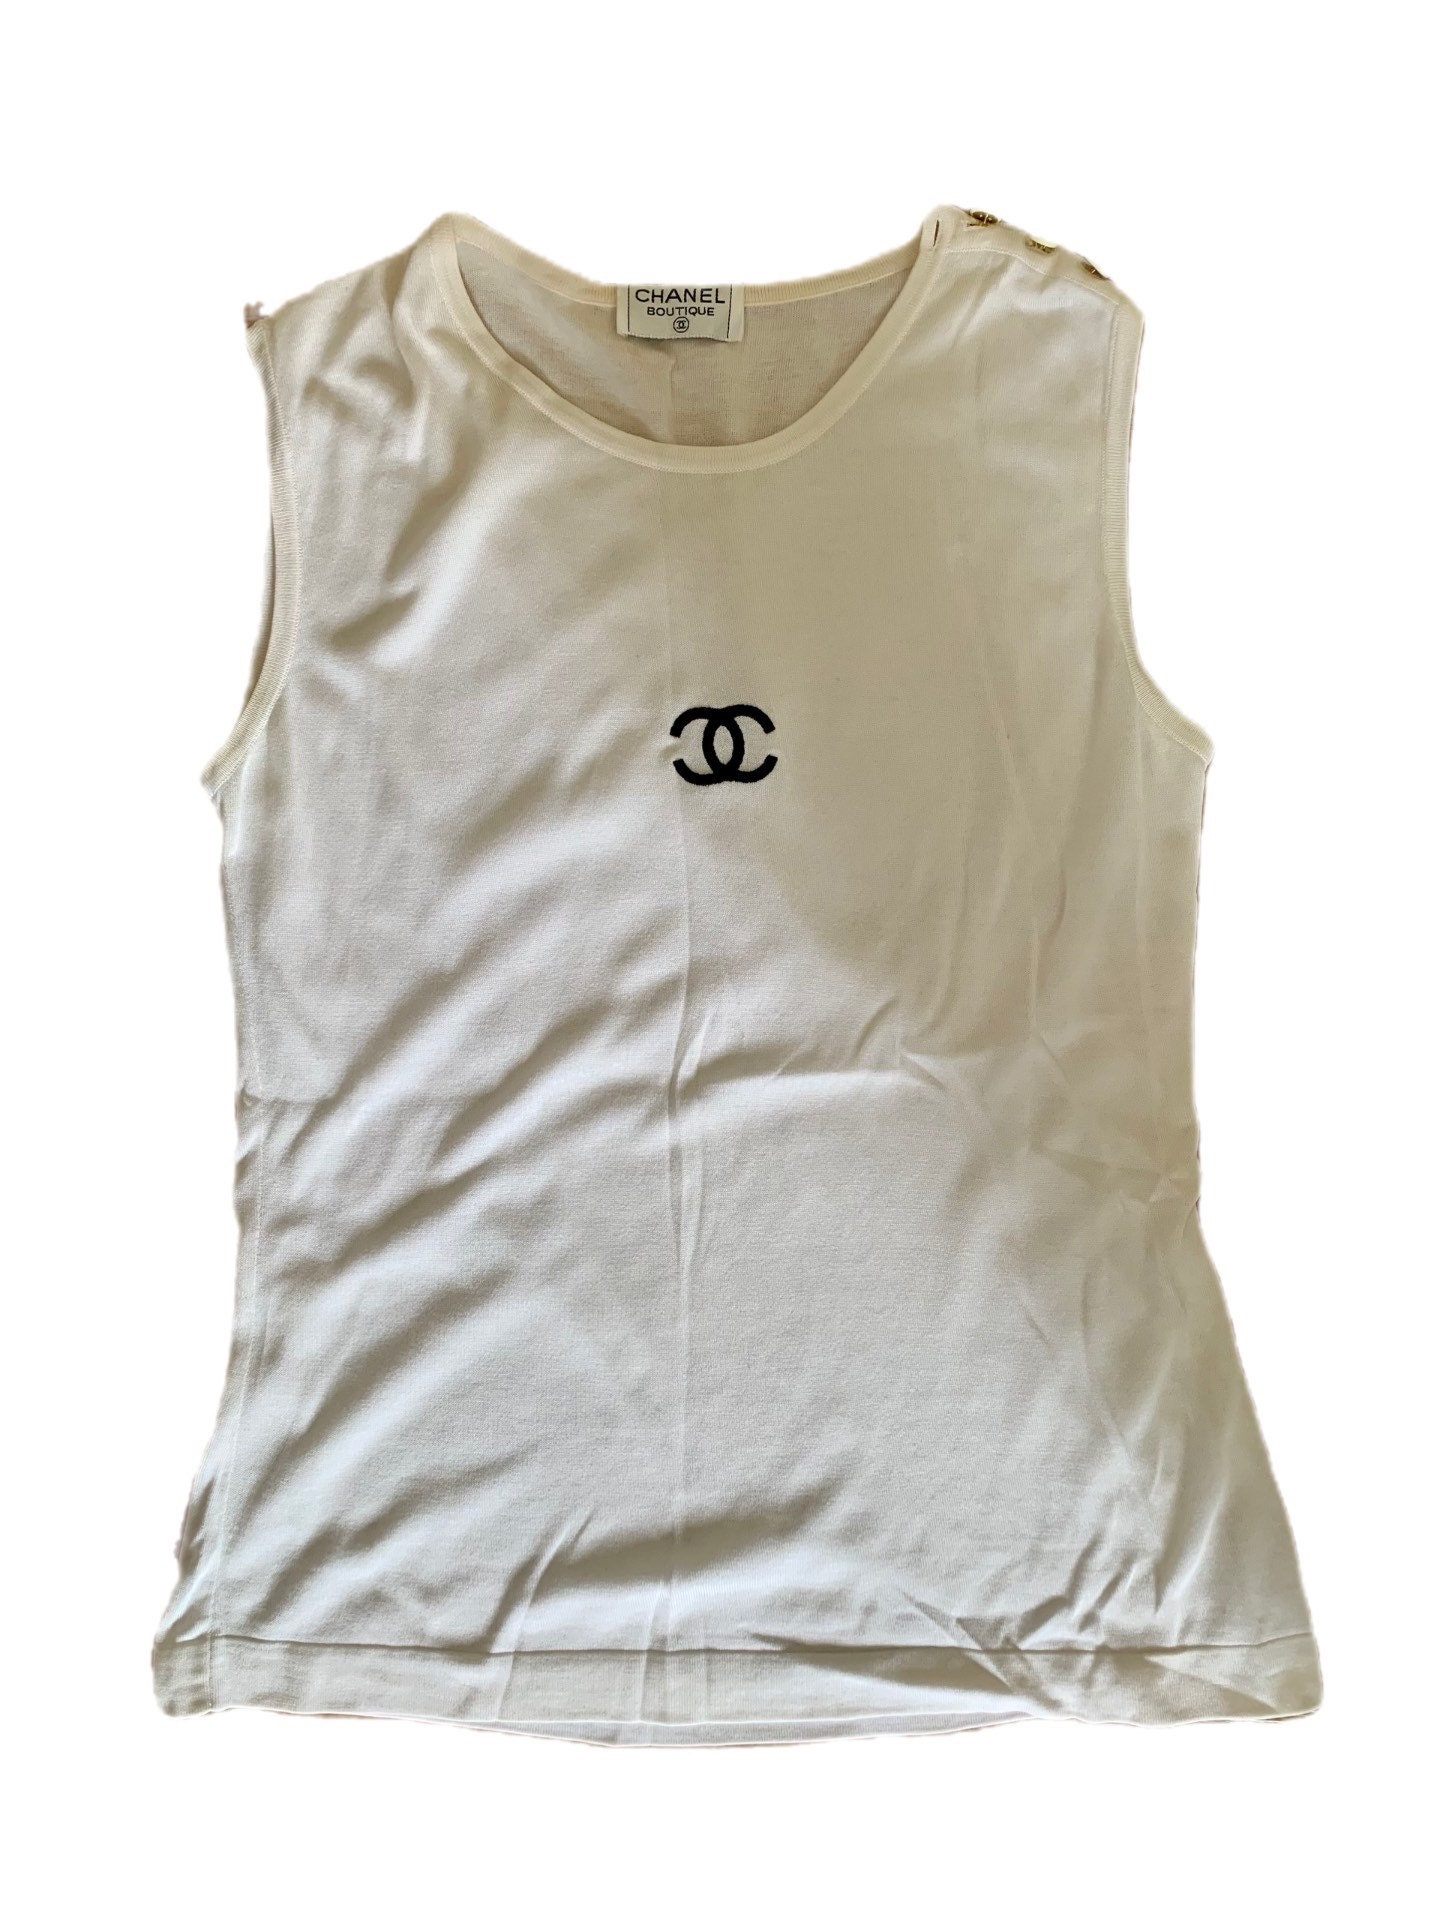 Chanel White Openwork Top w/ Long Sleeves